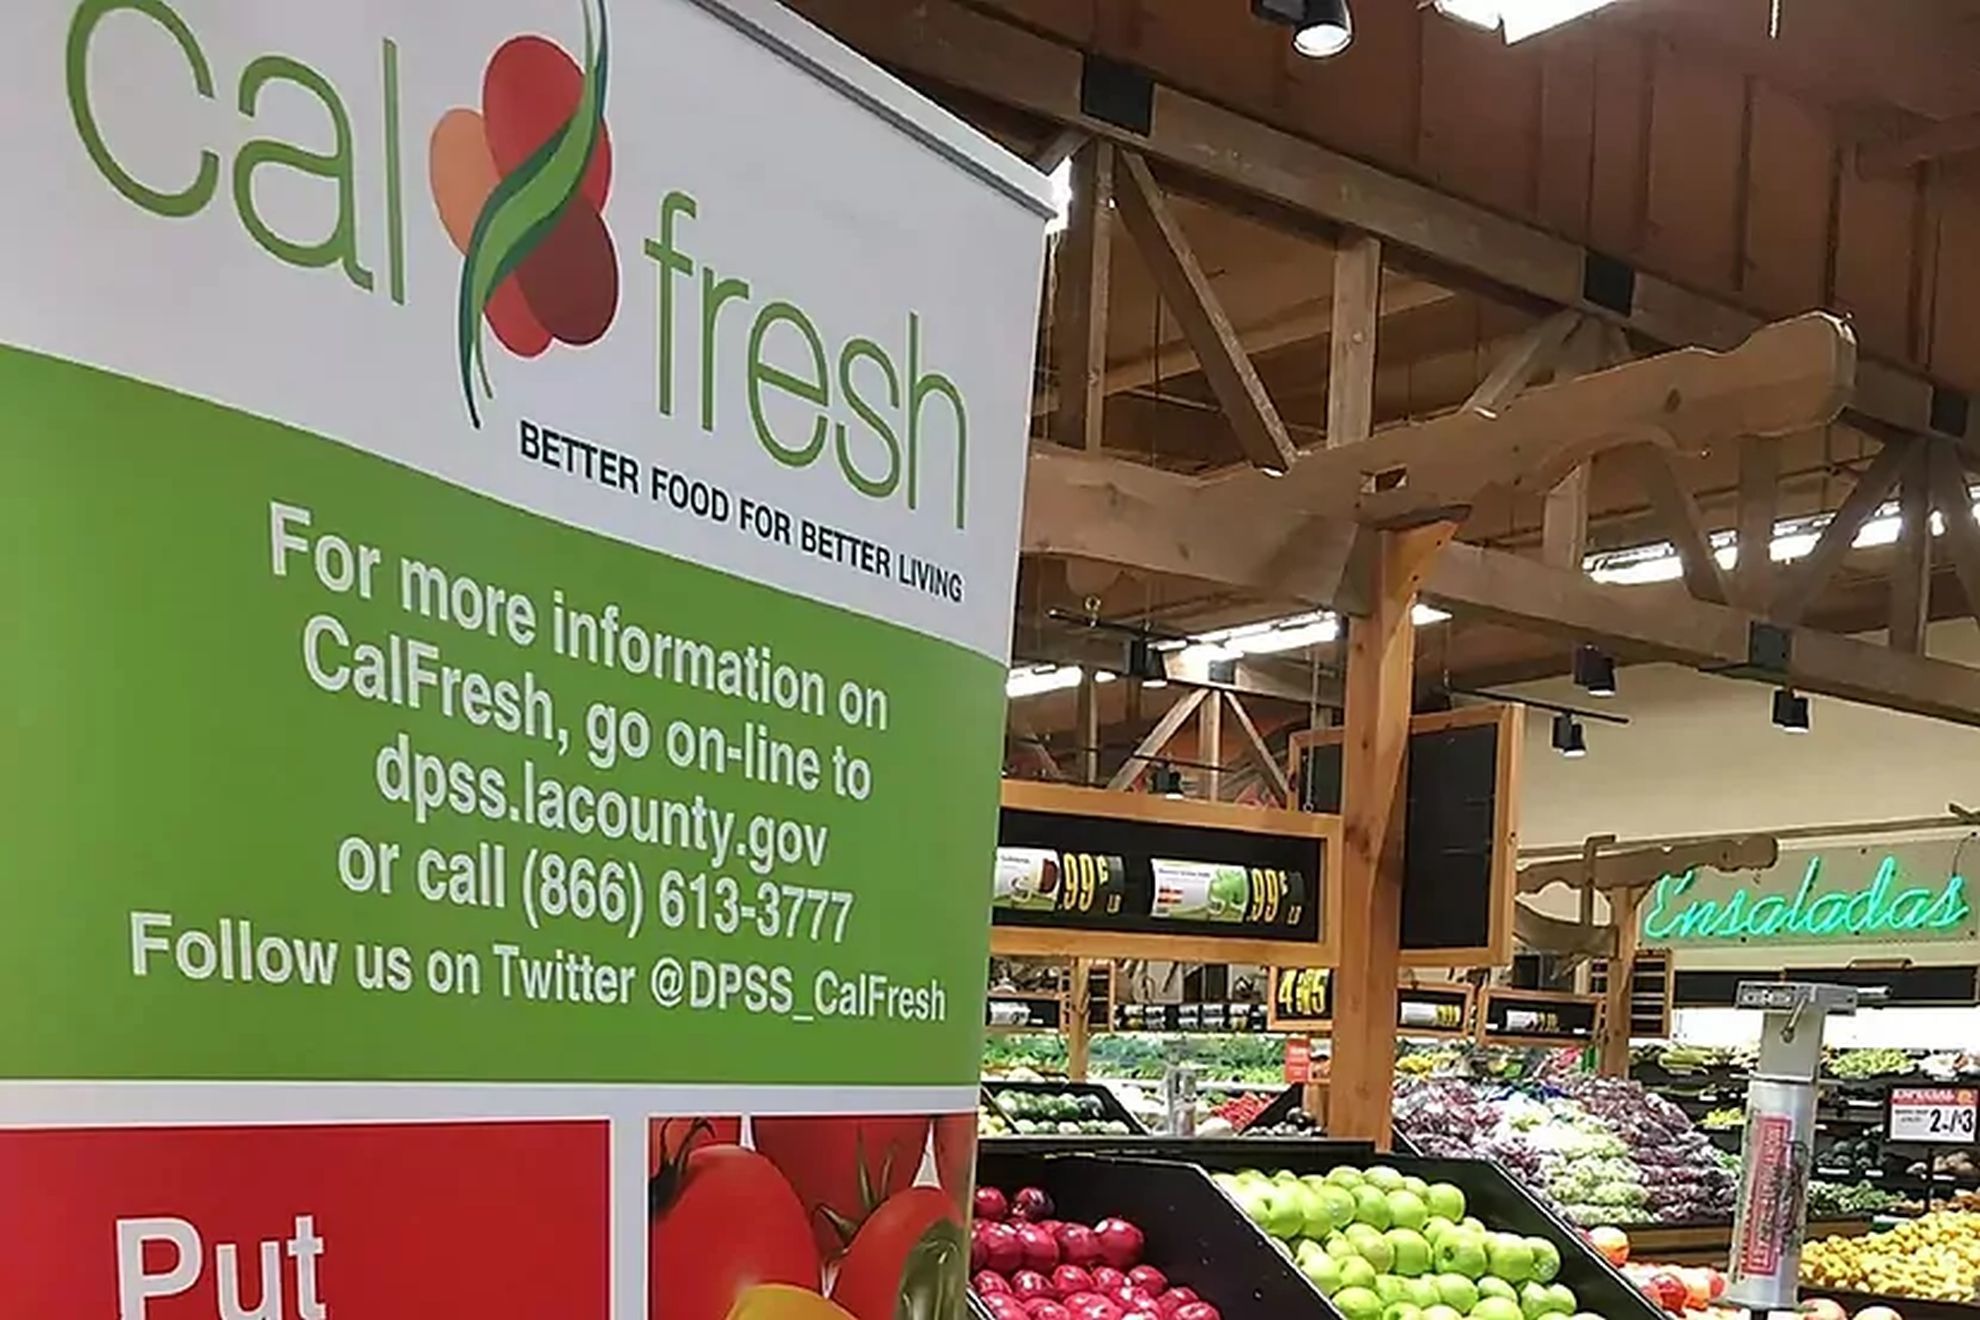 CalFresh Balance: How to know how much money is left on your card?